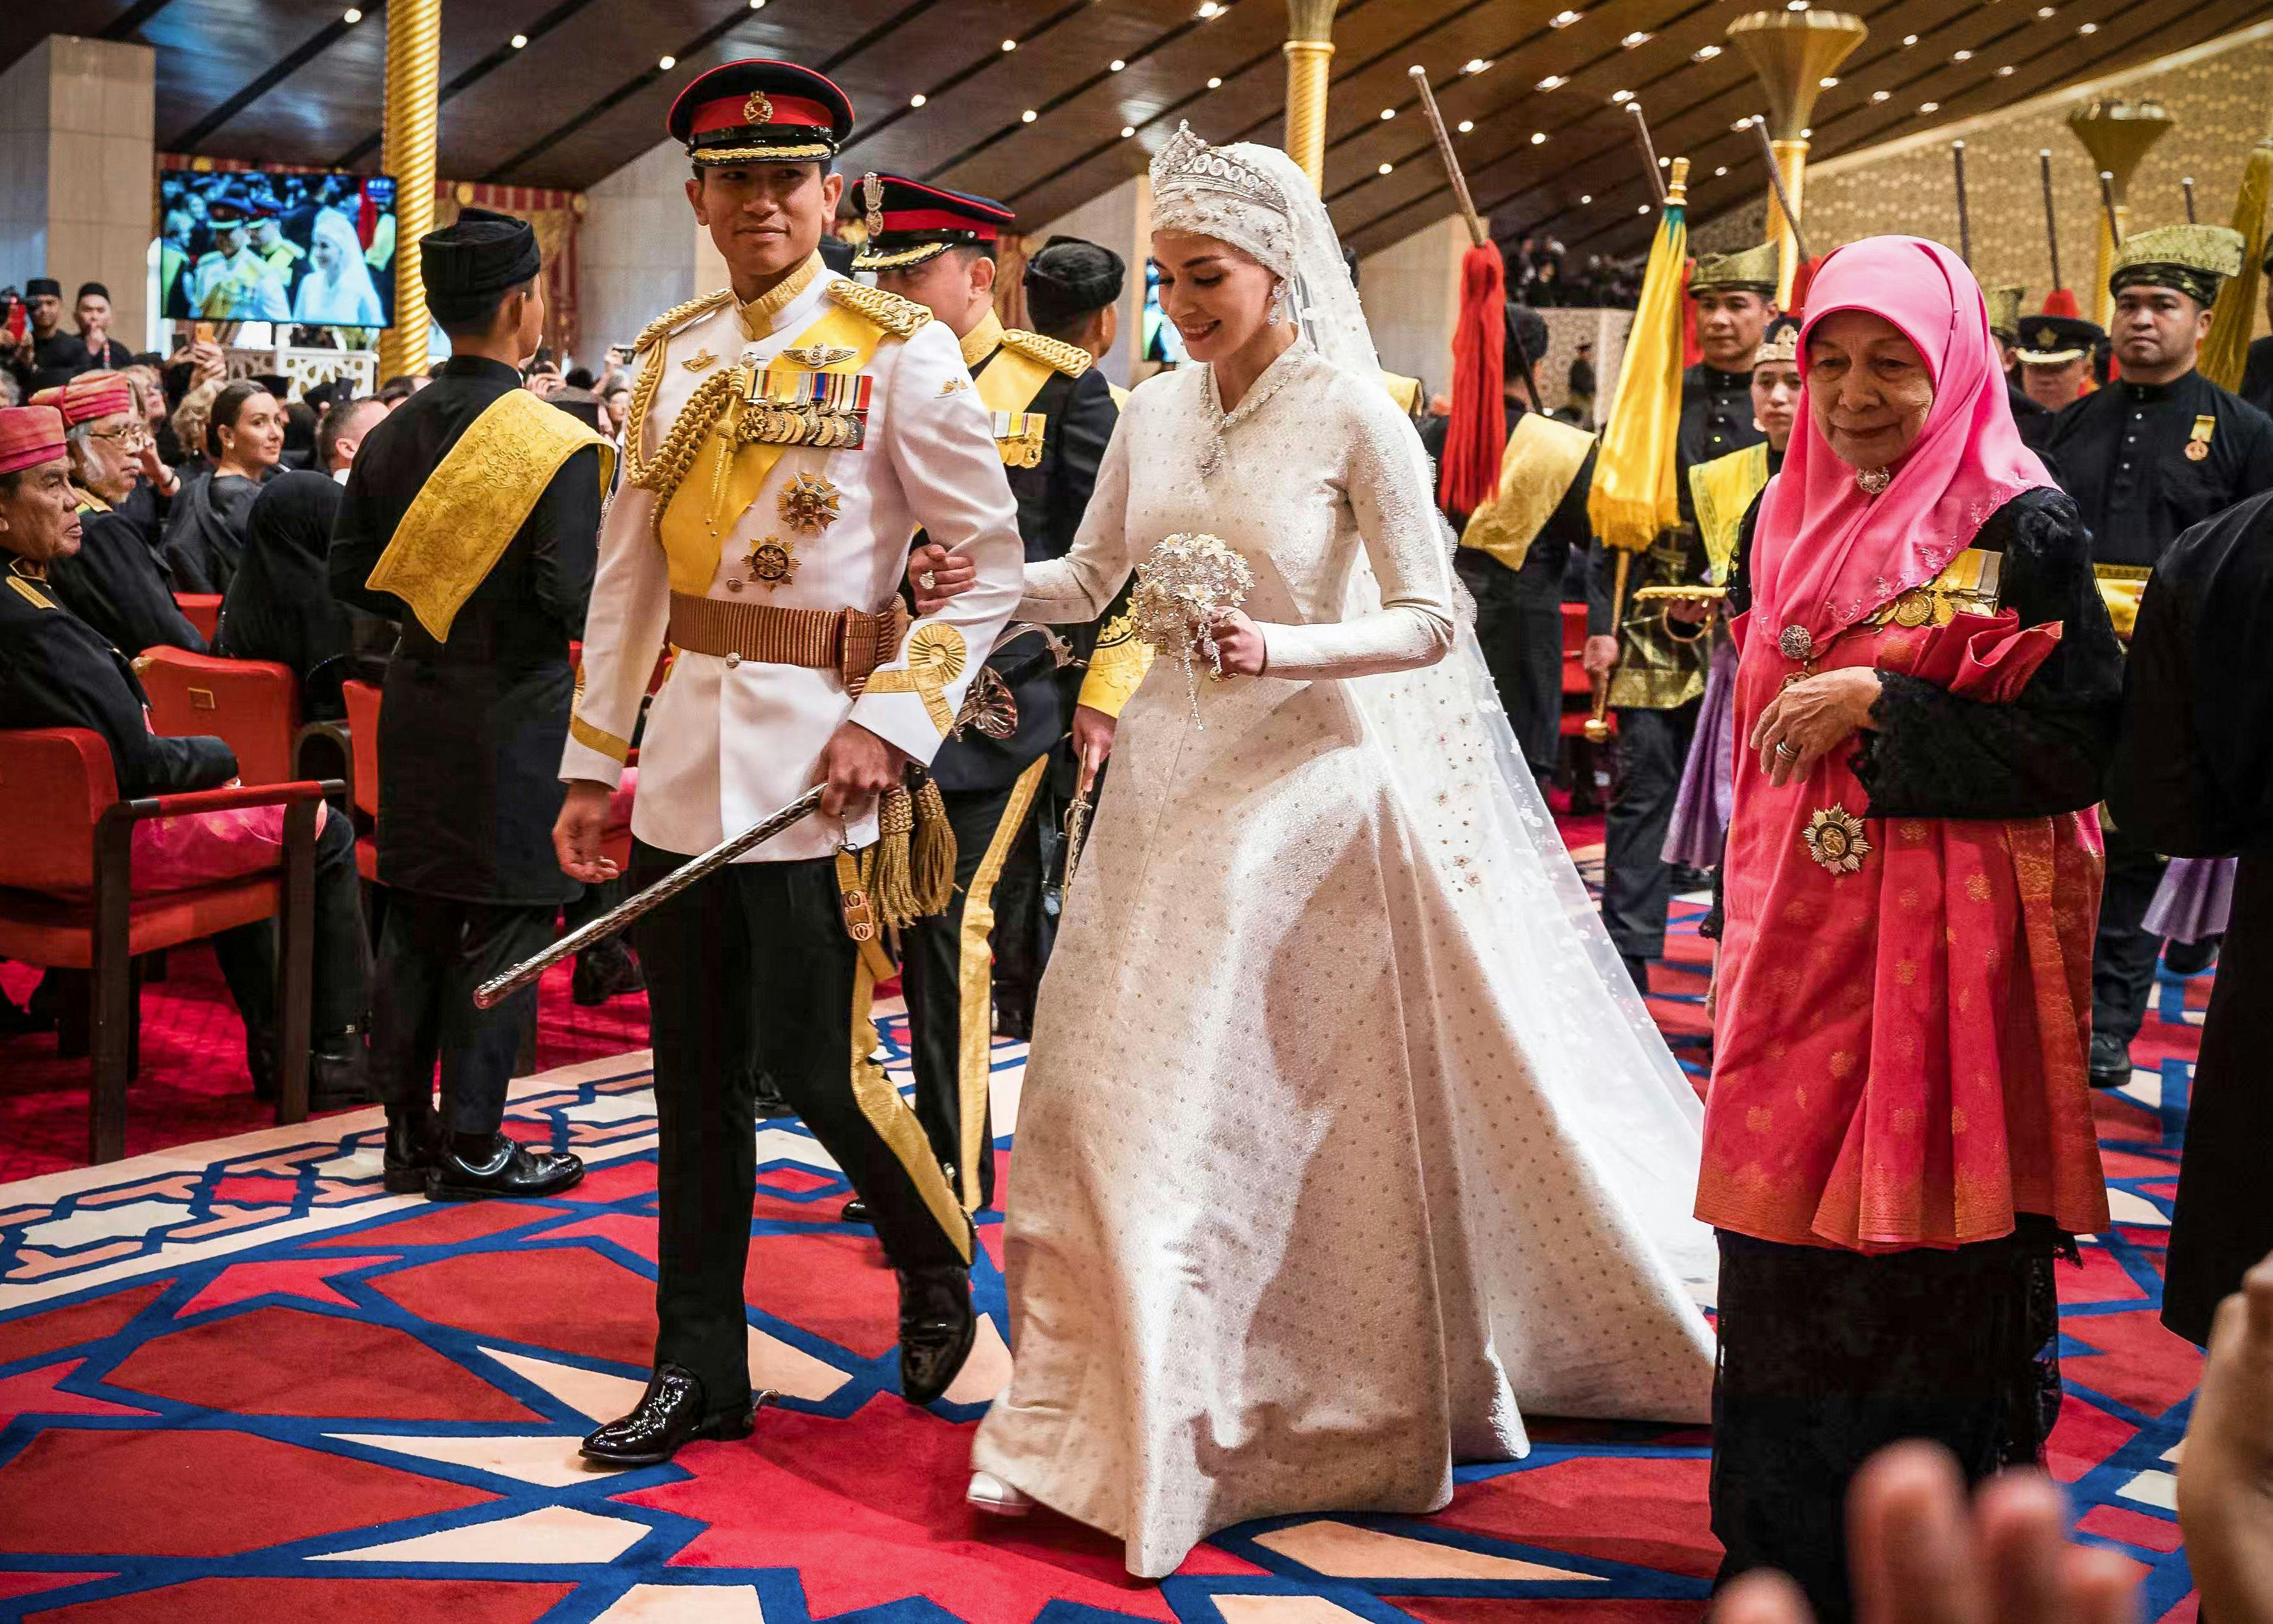 Prince Abdul Mateen (L) and Yang Mulia Anisha Rosnah walk down the aisle during their wedding reception at Istana Nurul Iman in Brunei's capital Bandar Seri Begawan on January 14, 2024. Lavish celebrations for the wedding of Brunei's Prince Abdul Mateen and his wife reached a climax on January 14 with a glittering ceremony attended by government leaders and blue-blooded guests from Asia and the Middle East. (Photo by IQBAL SELAMAT / AFP)